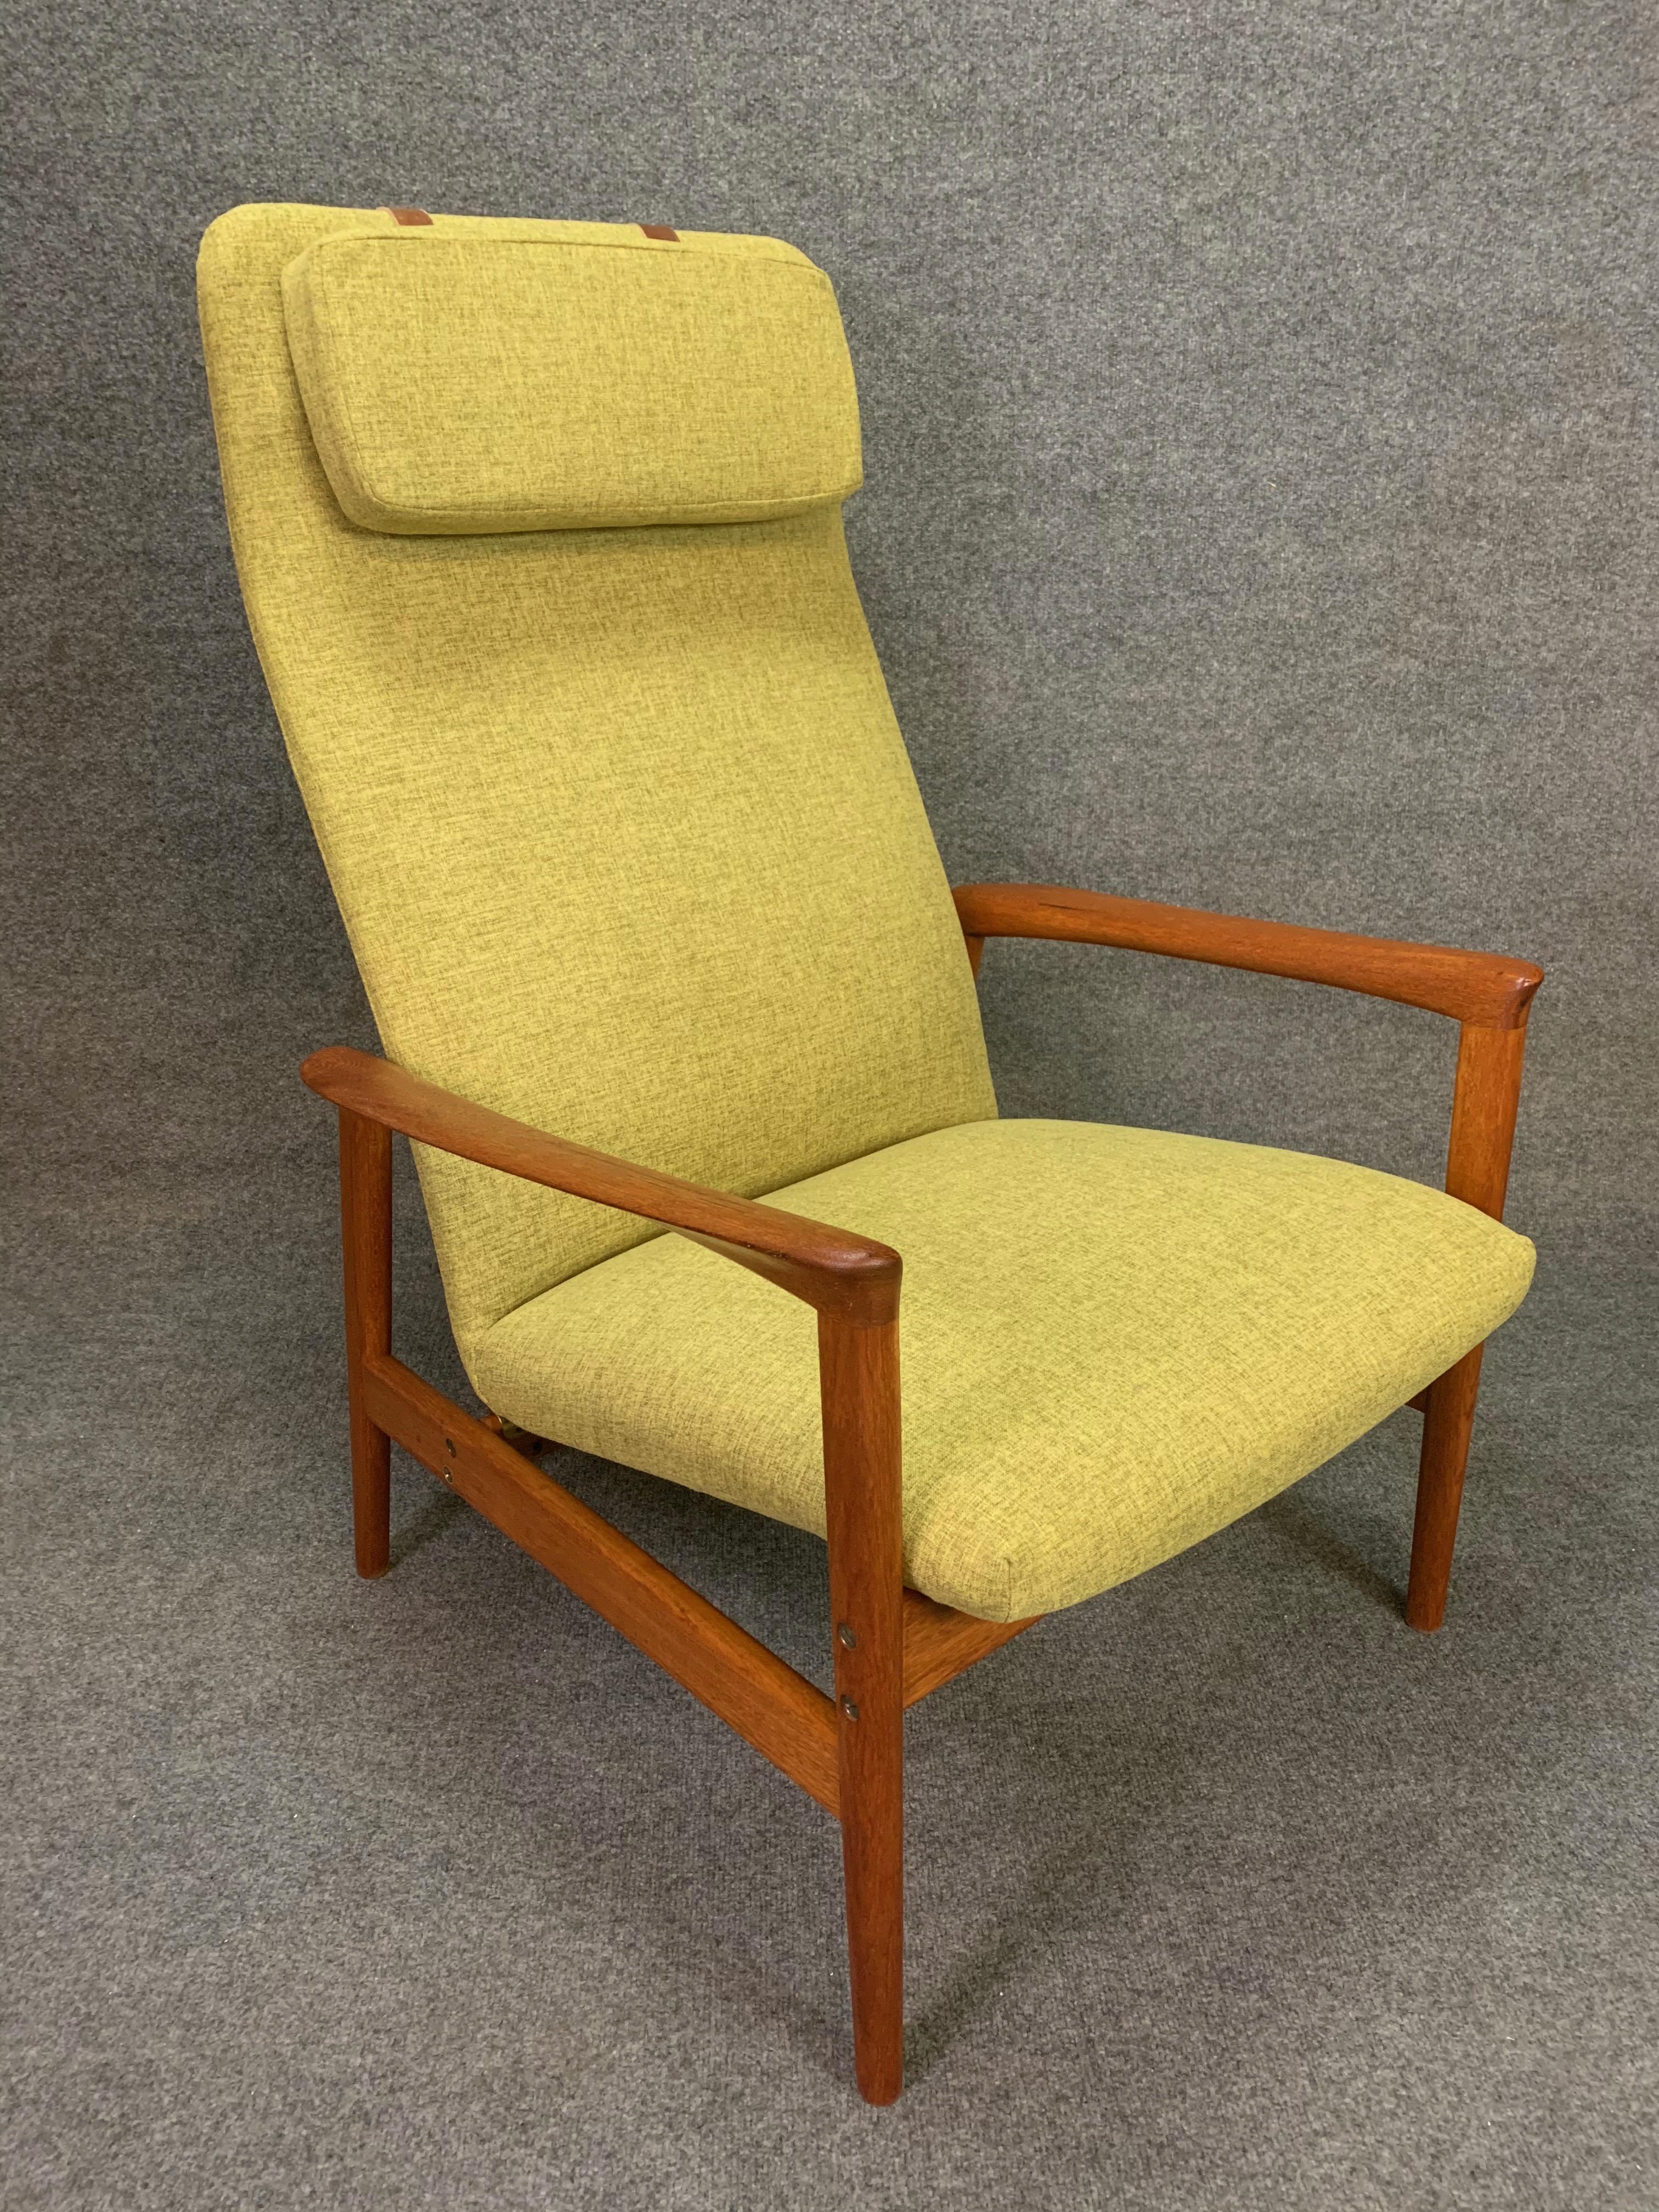 Here is a beautiful 1960 Scandinavian Modern lounge chair in teak reminiscent of the design of Al Svensson for DUX of Sweden.
This comfortable chair, recently imported from Scandinavia to California before its restoration, features a solid, organic